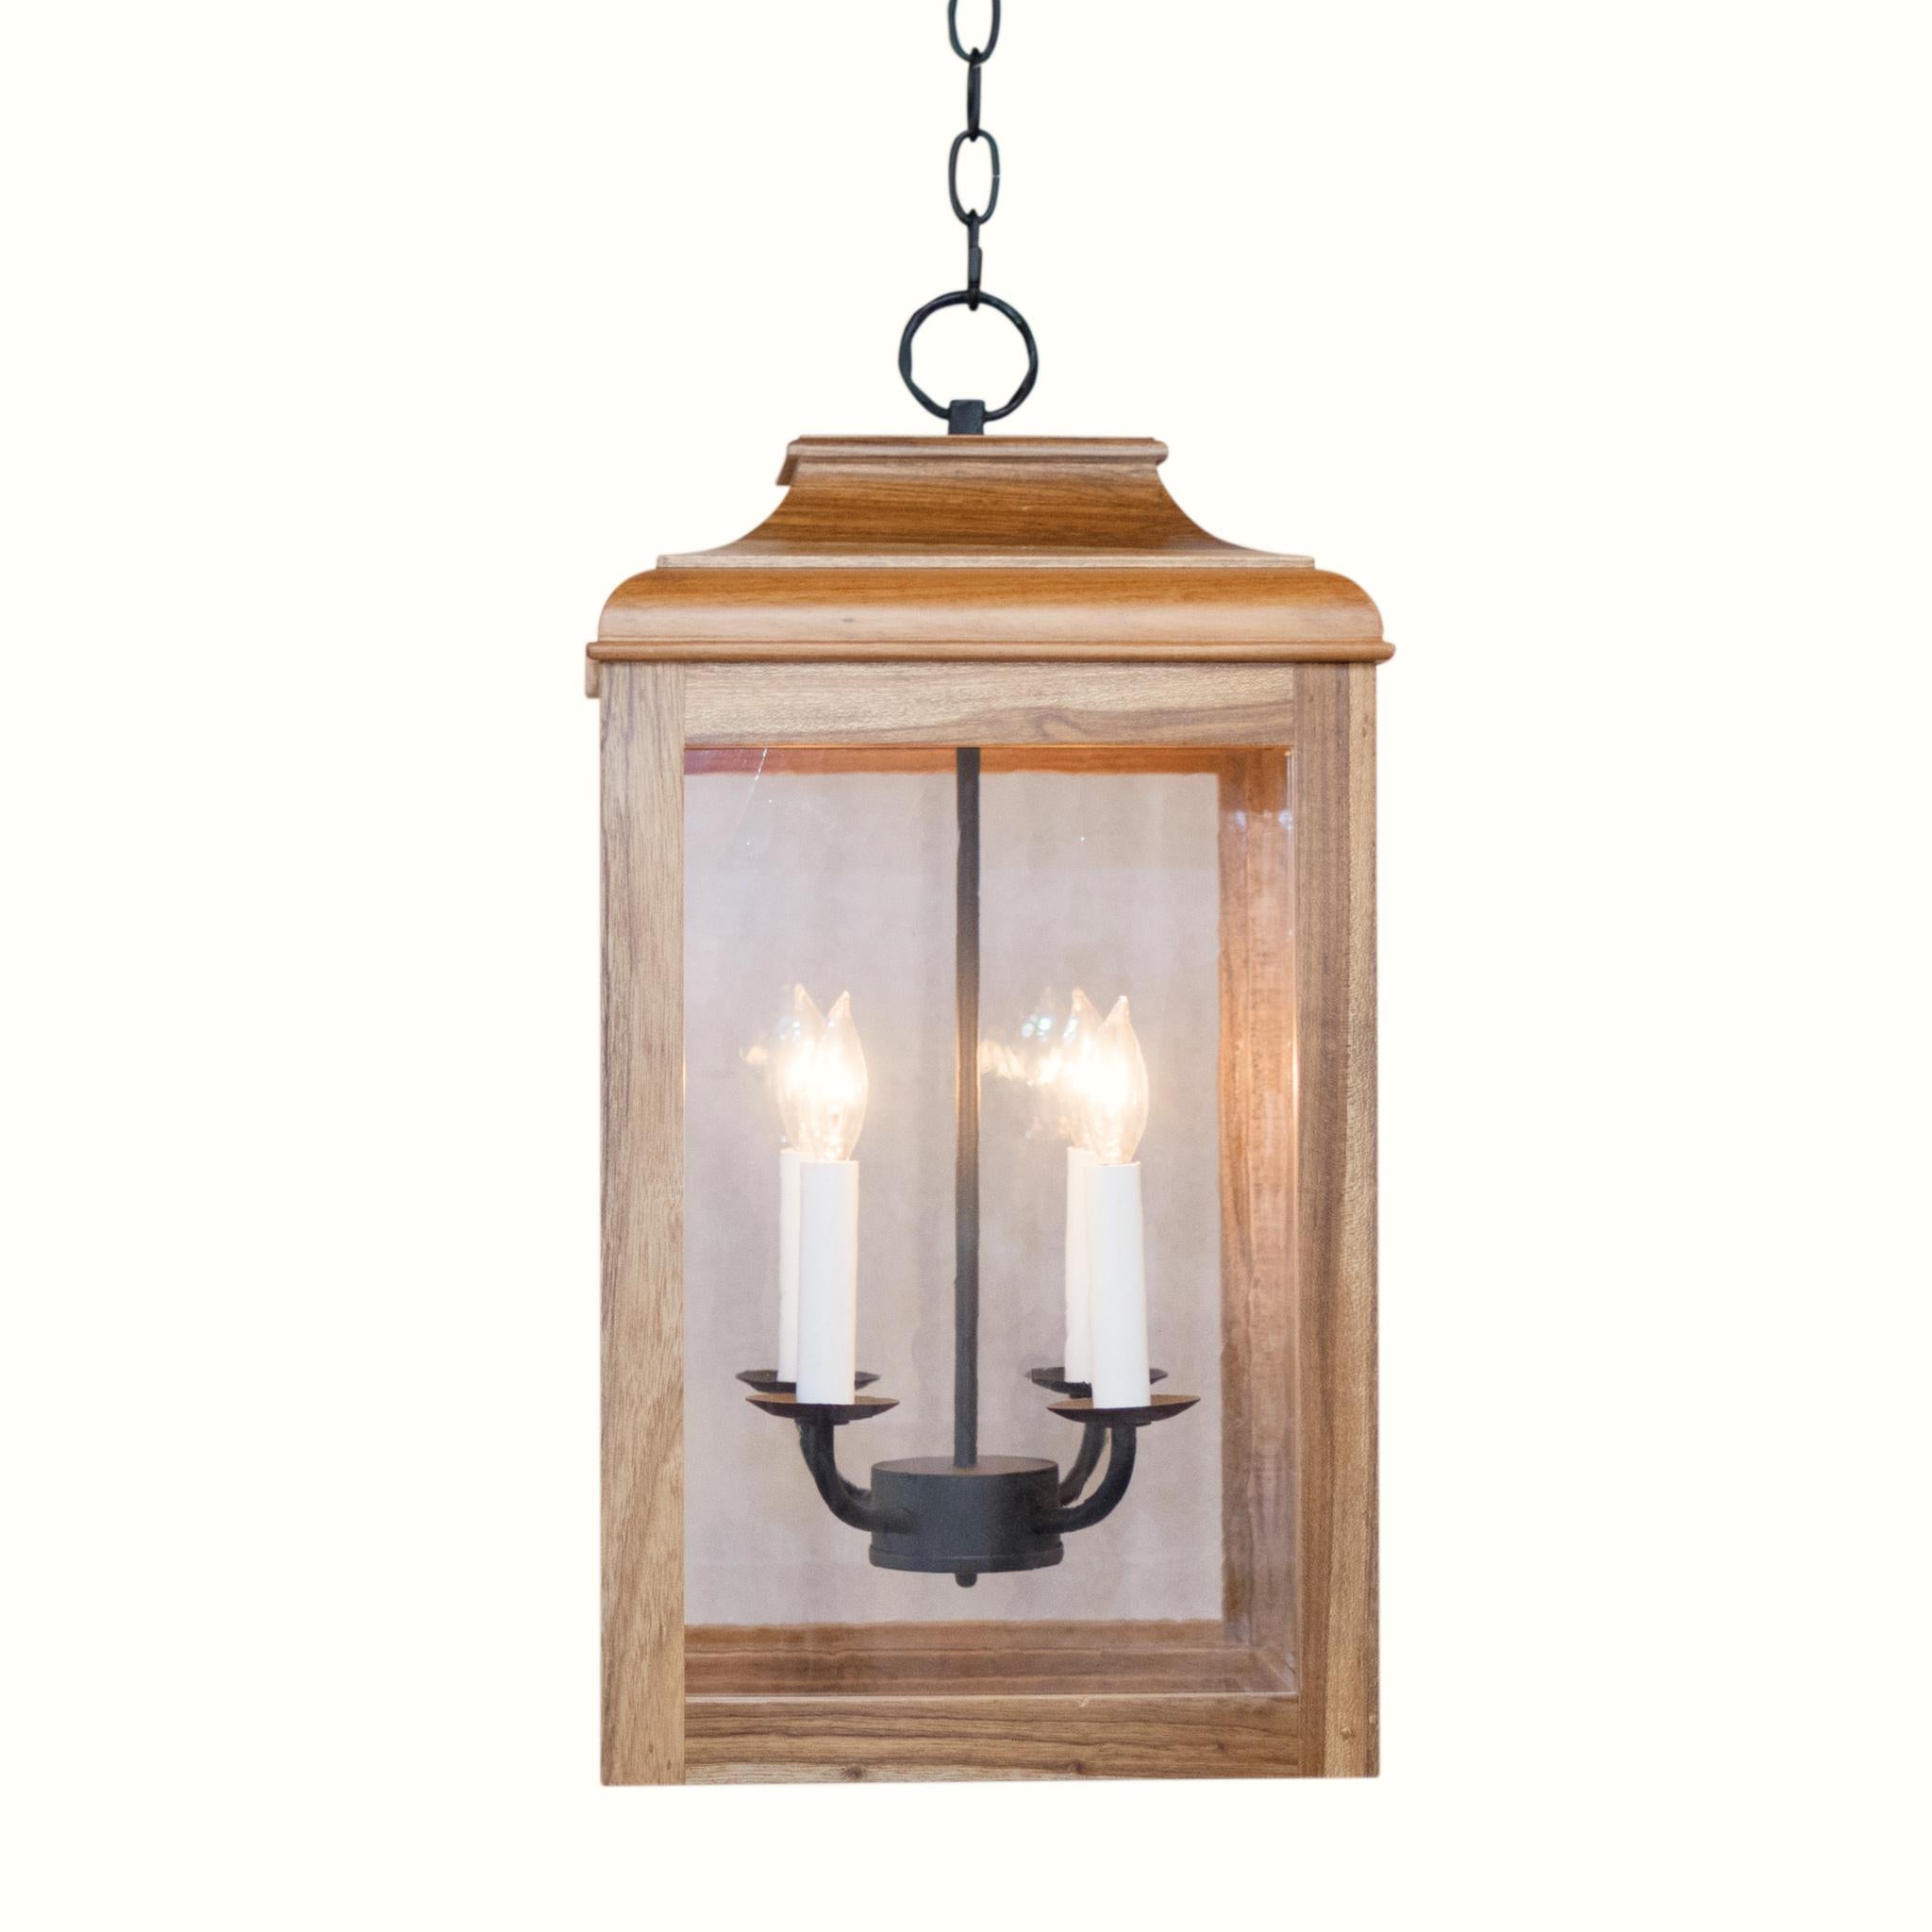 This elegant and ever-versatile wood lantern was inspired by the French and English lanterns of the 19th century and early 20th century. Our updated versions are perfect in any home as they are a transitional design. This hanging wood pendant is